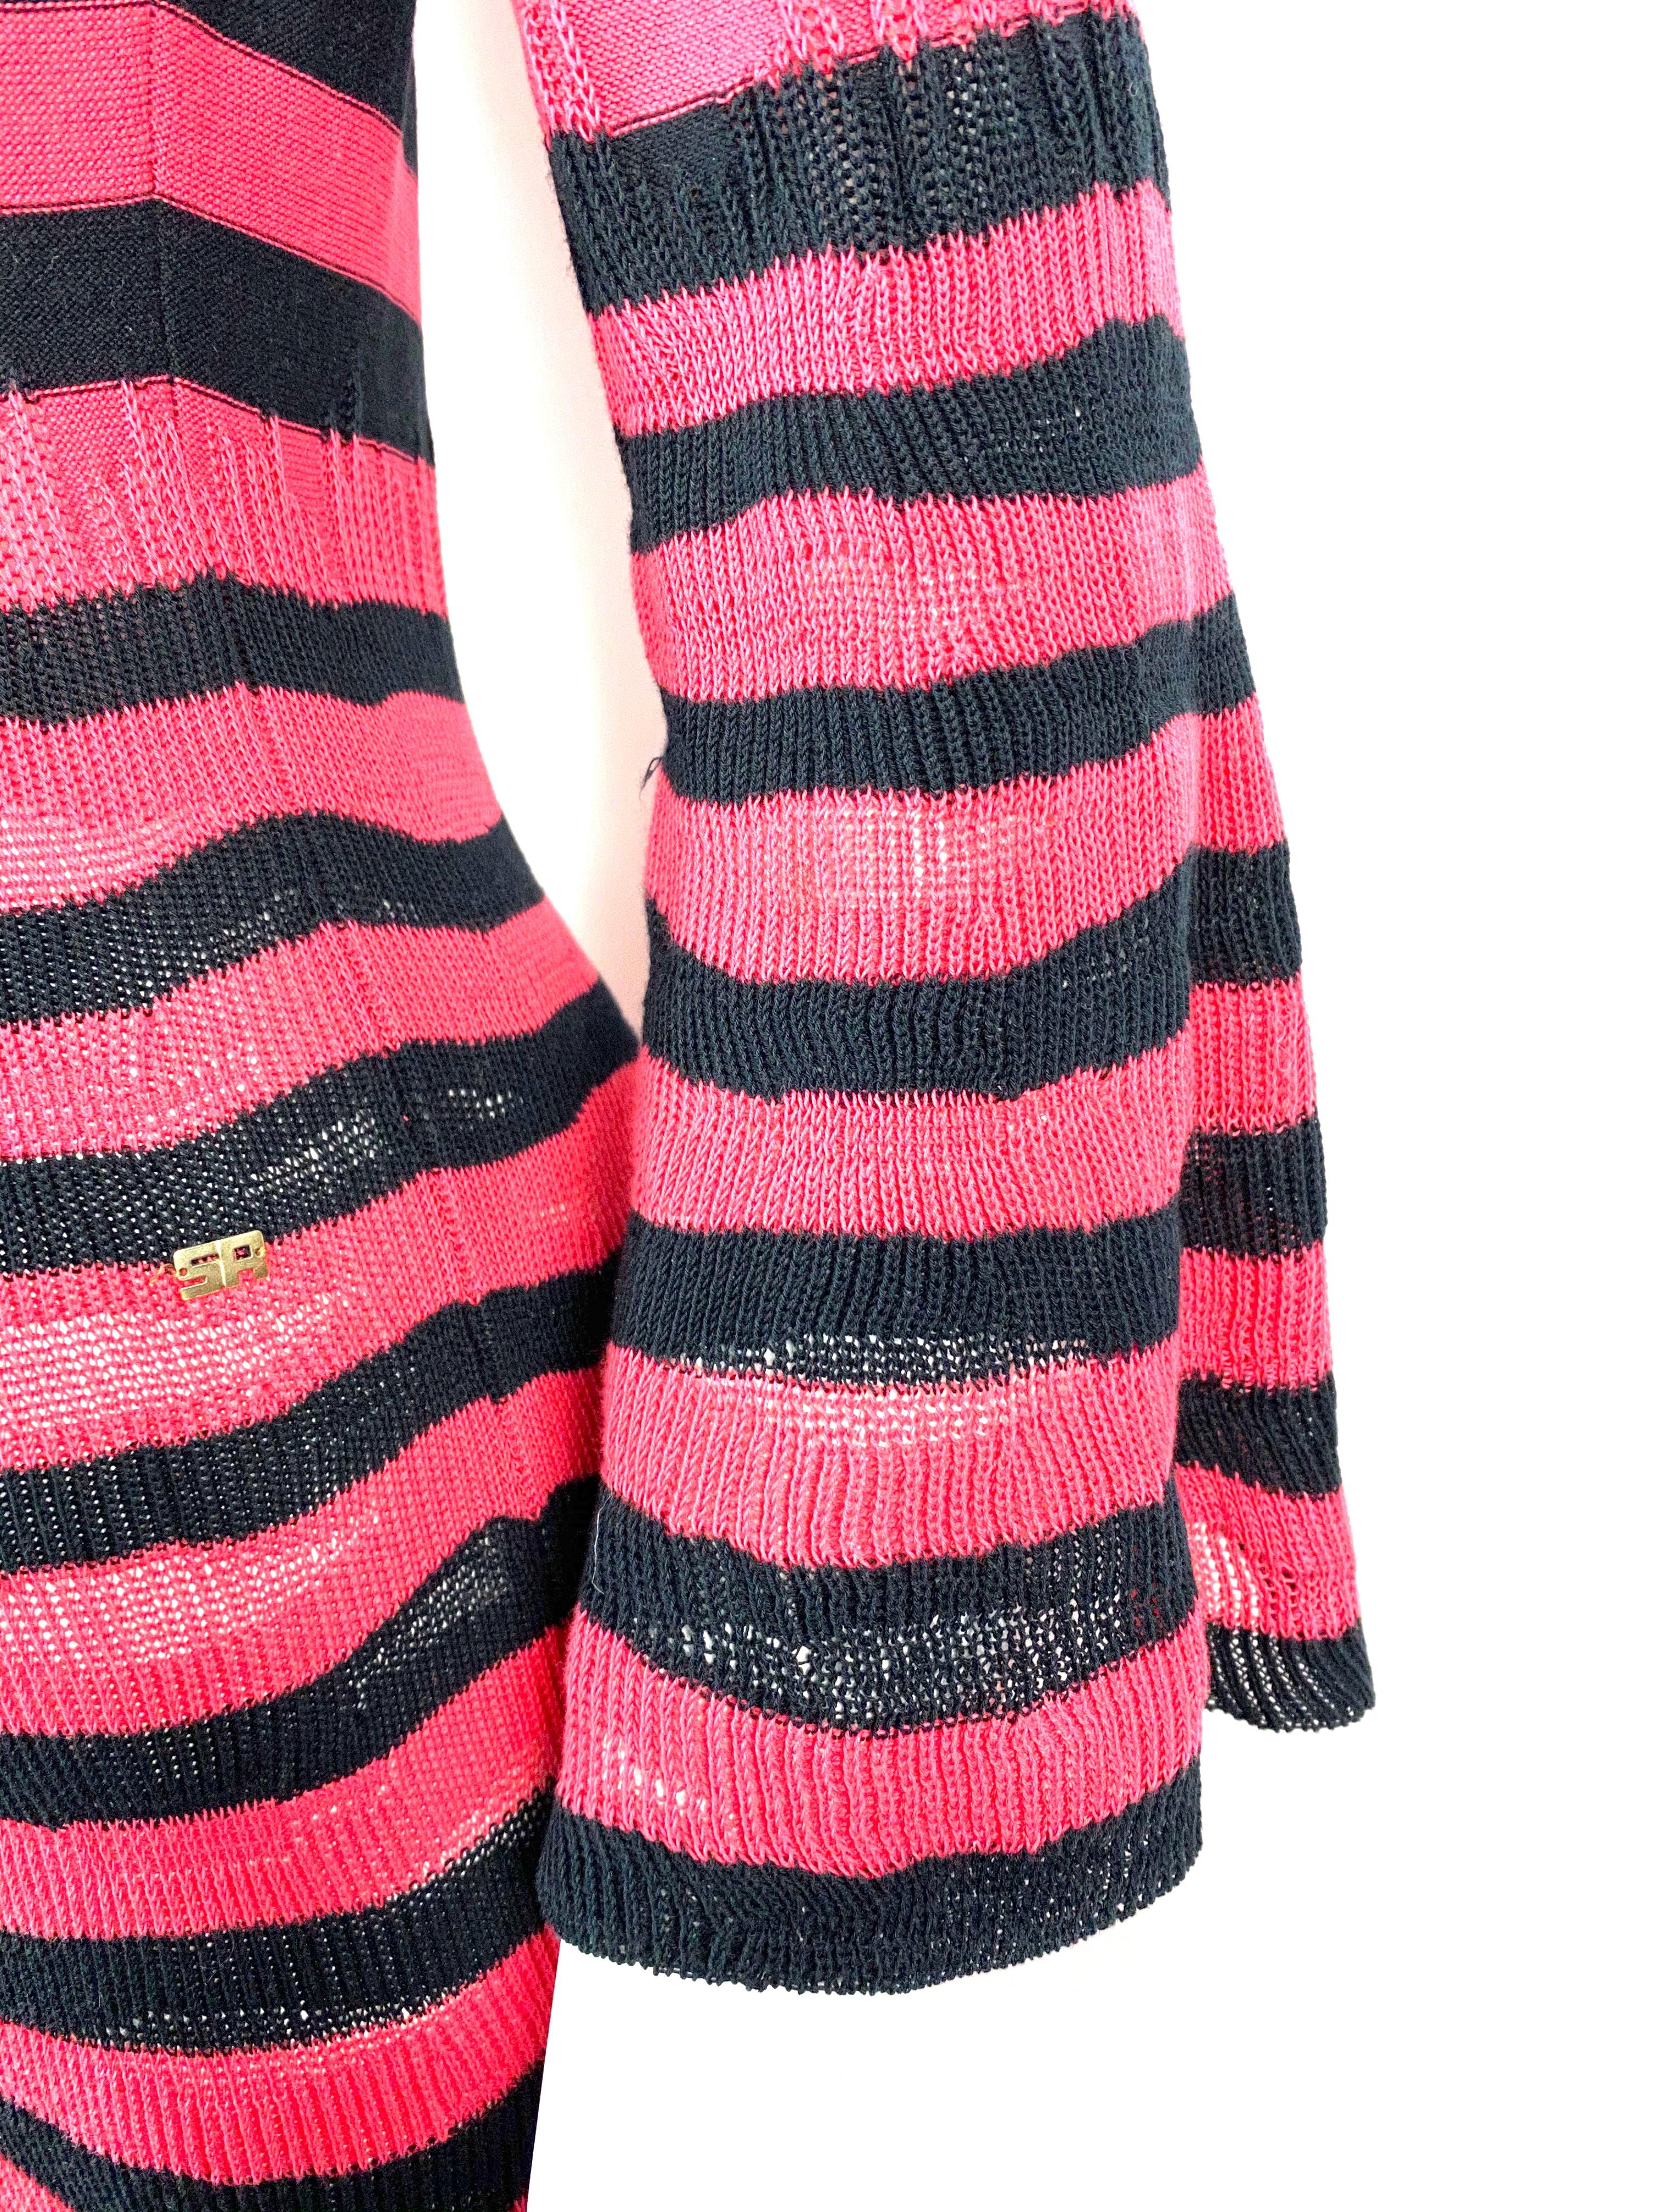 Sonia Rykiel Paris Pink and Navy Striped Maxi Dress w/ Flower Brooch Size 38 For Sale 8